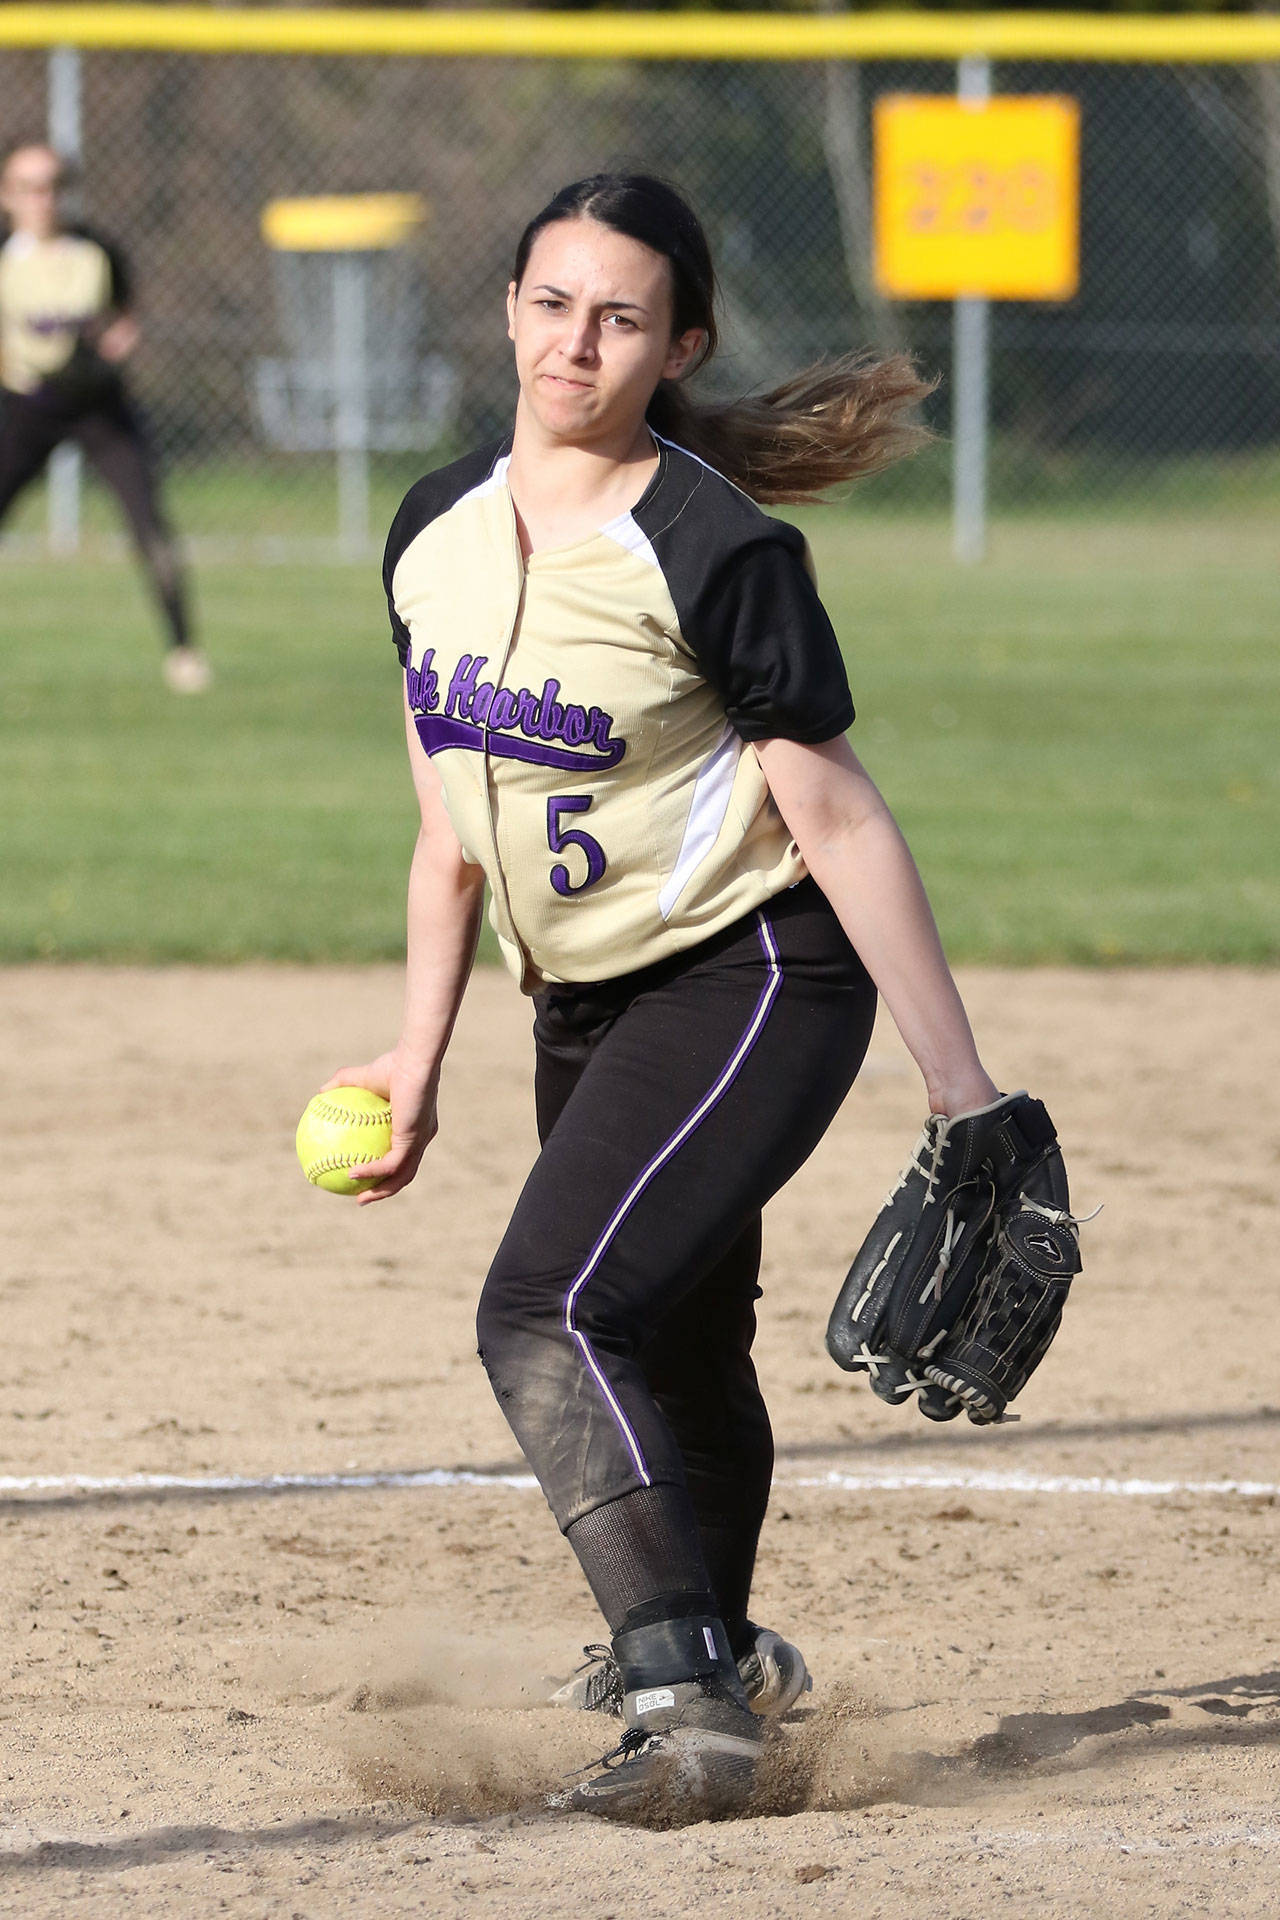 Starting pitcher Cierra LeGendre is one of the returning players for the Oak Harbor softball team. (Photo by John Fisken)